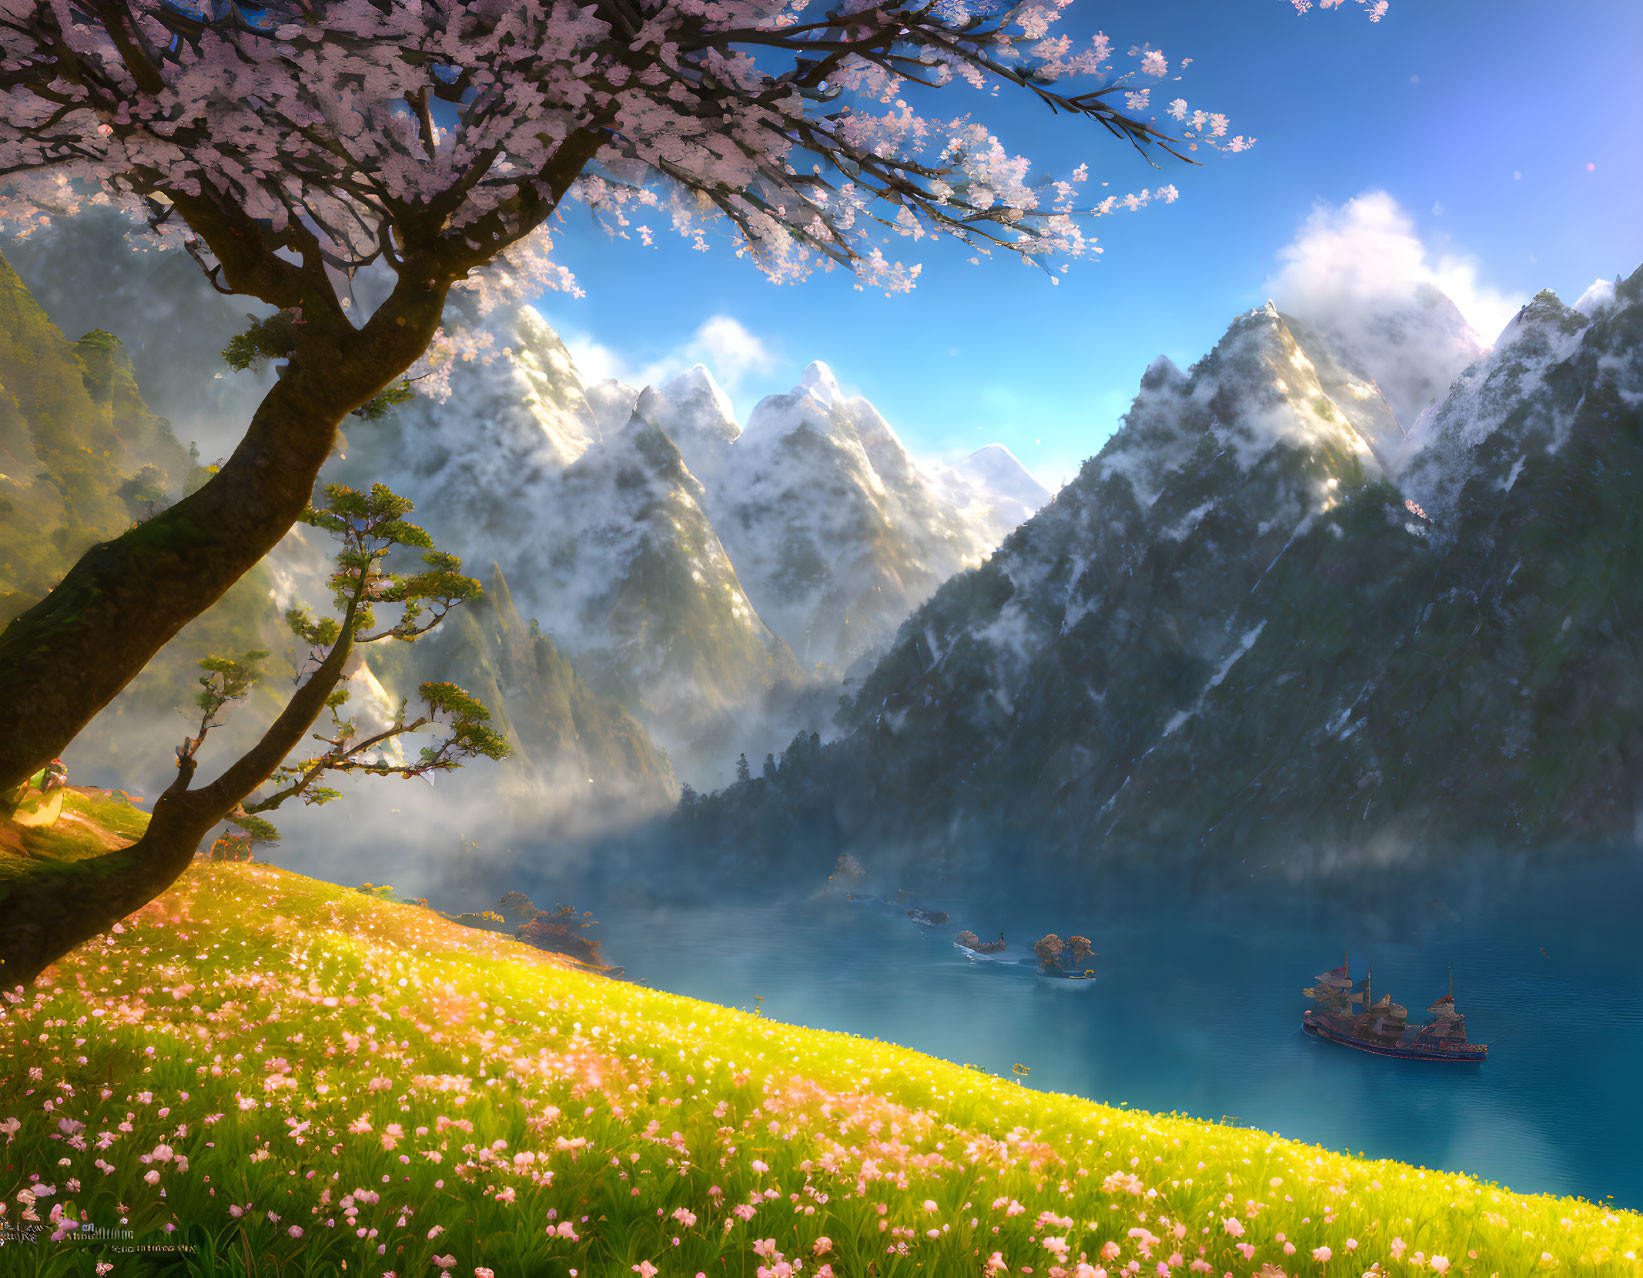 Scenic landscape: cherry tree, lake, boats, snow-capped mountains